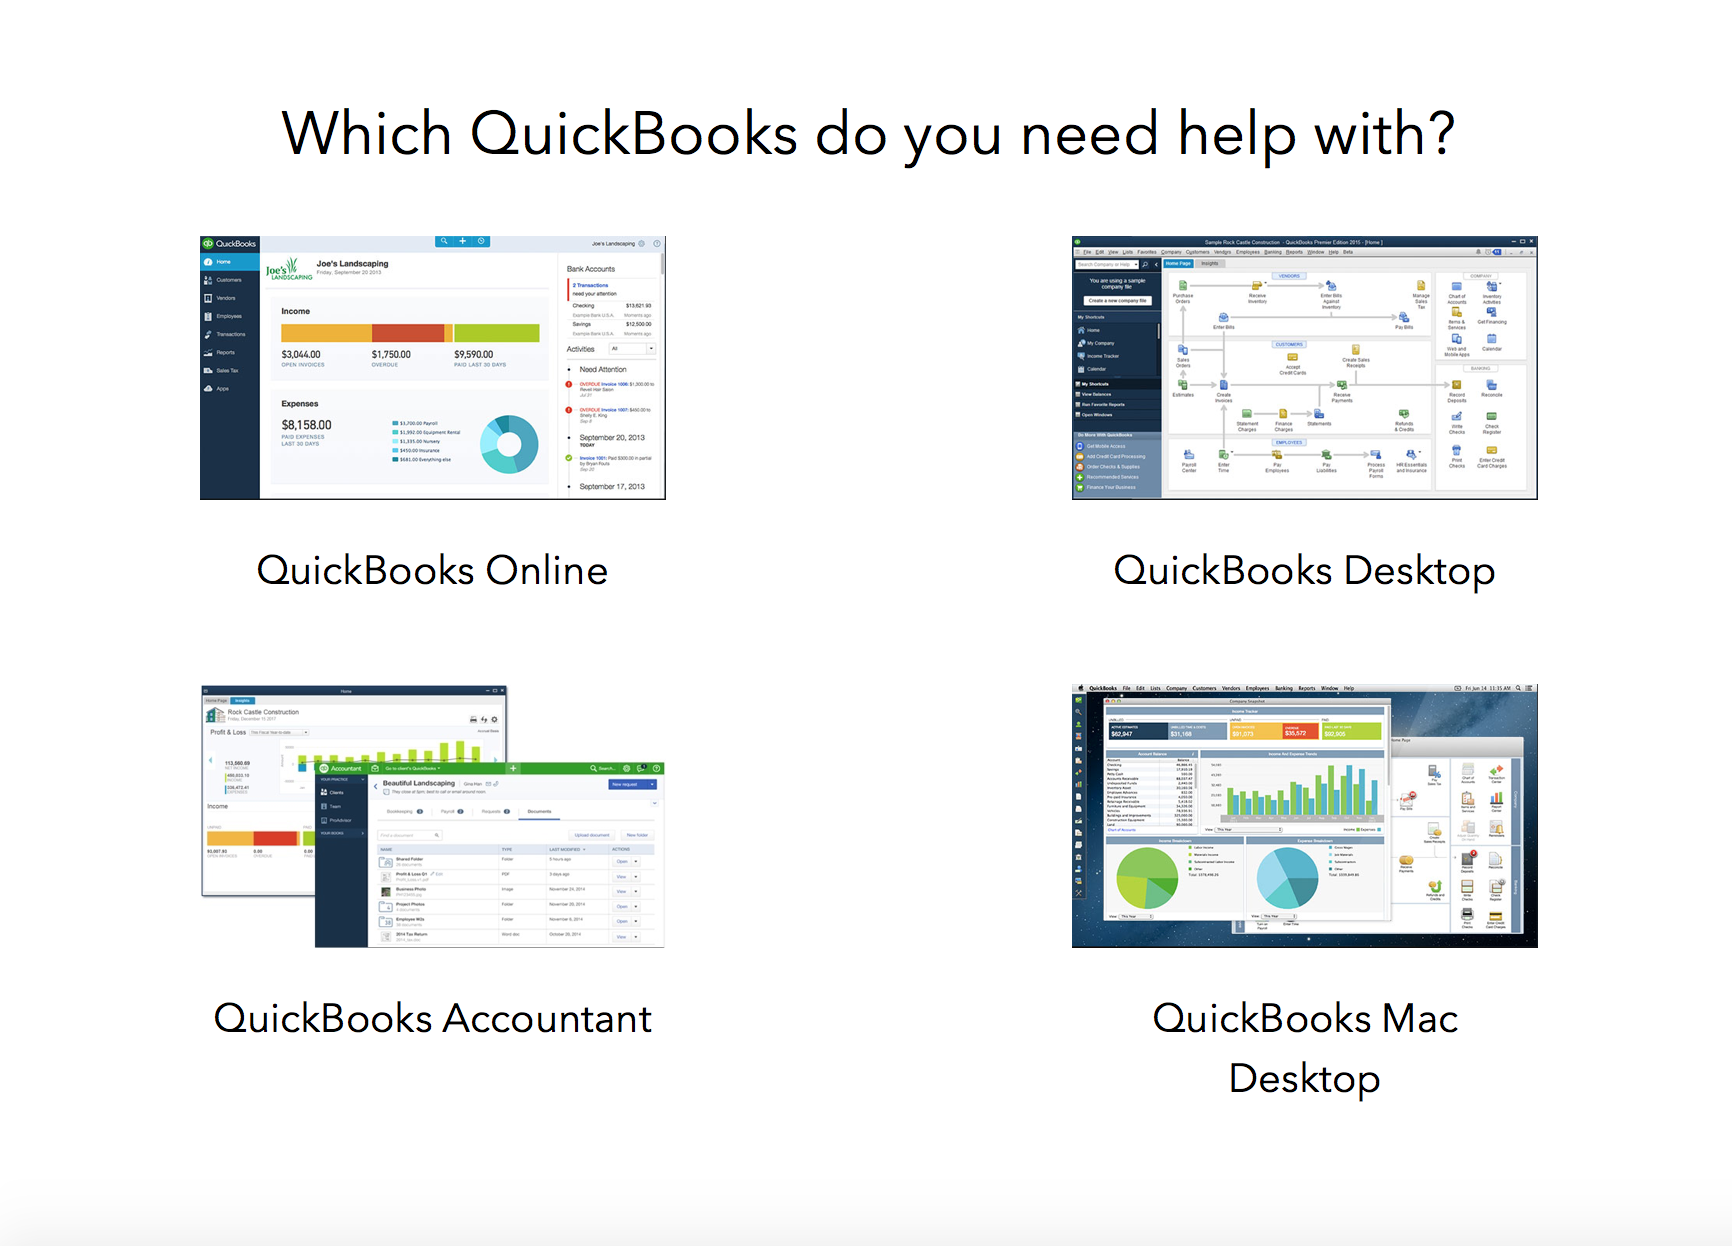 Quickbooks for Small Business